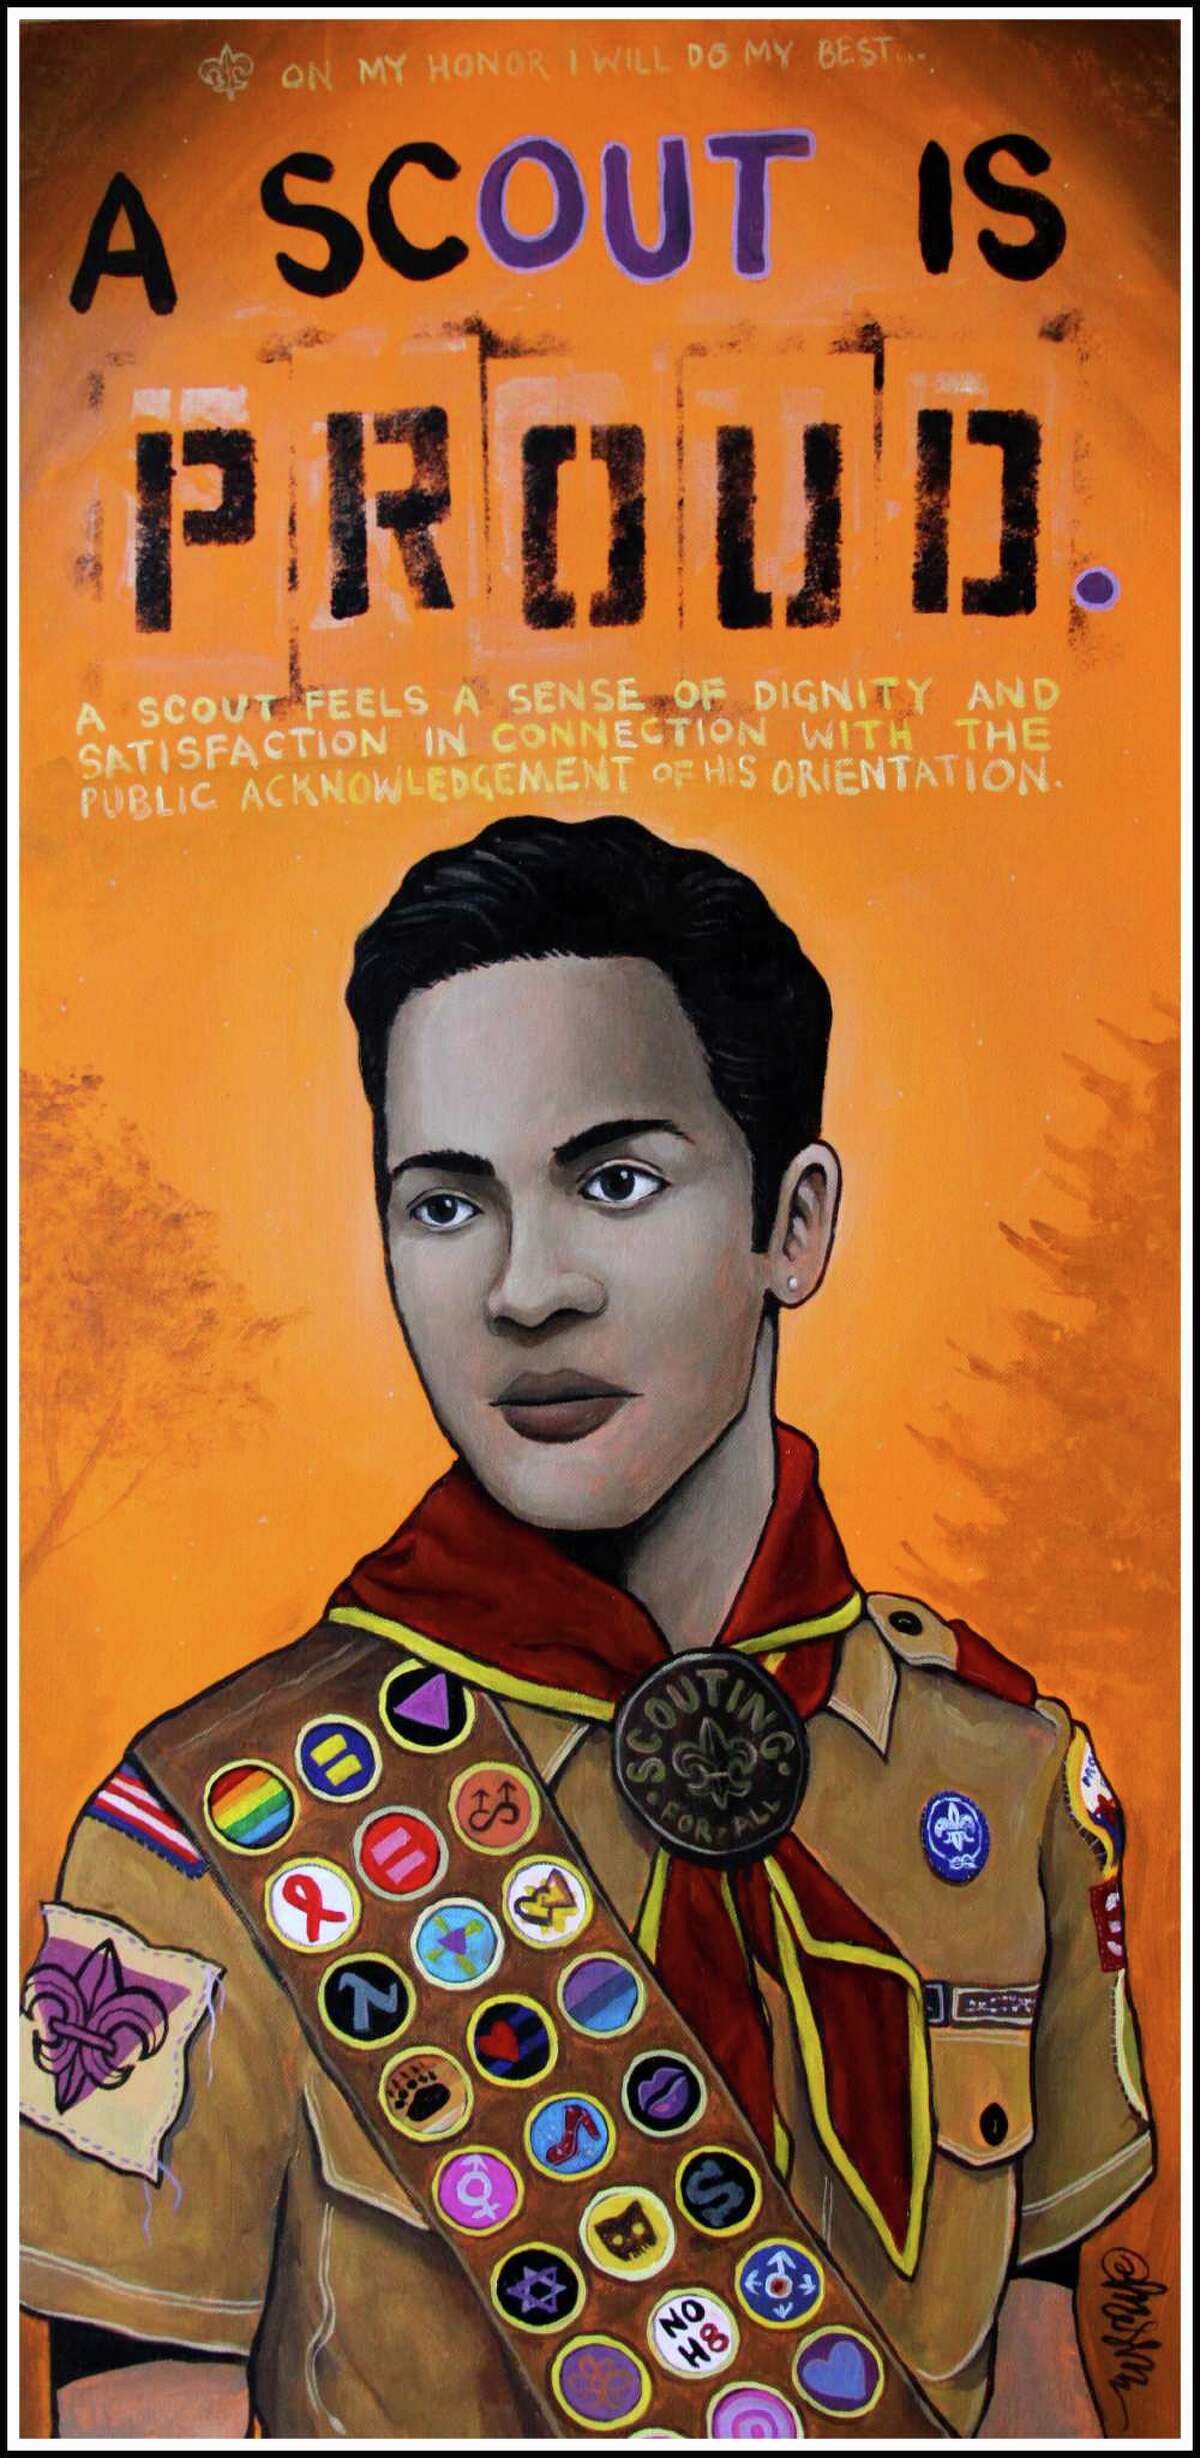 "A Scout is Proud," by Ricky Mestre, will be featured in the 2013 "SameSex" art show that opens Thursday, June 6, at City Lights Gallery in Bridgeport.